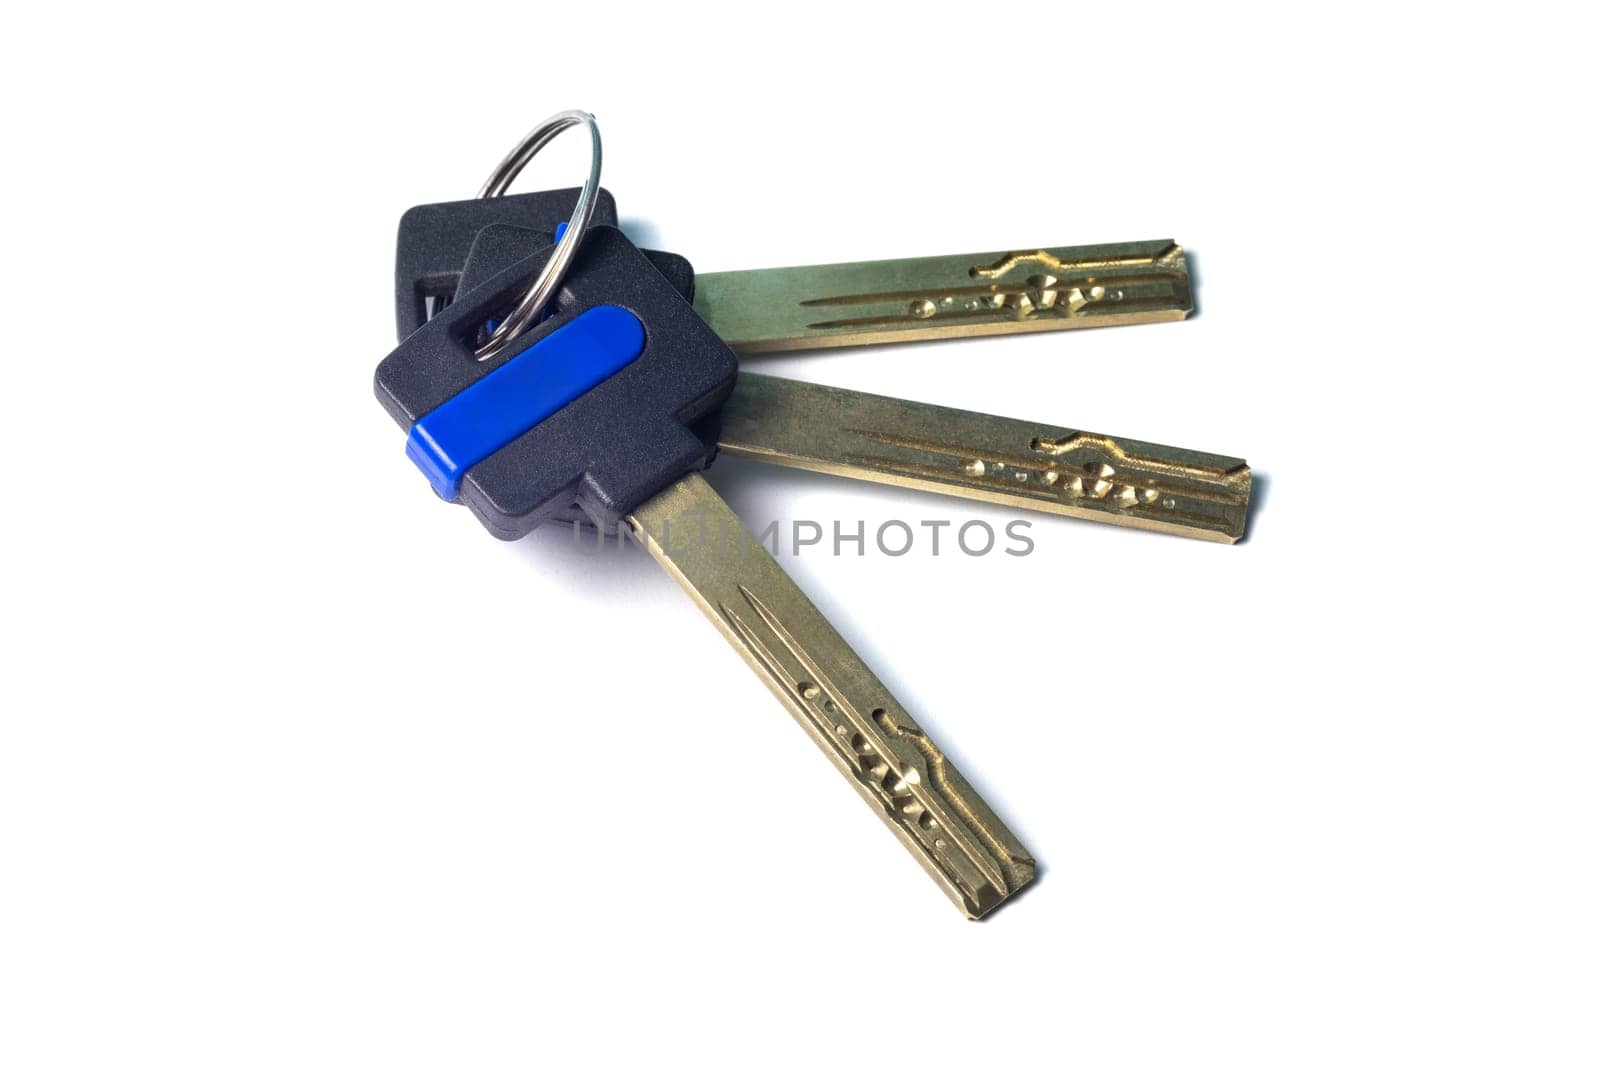 Bunch of modern door keys isolated on a white background. Keys with black plastic head and space for logo or name, close-up view